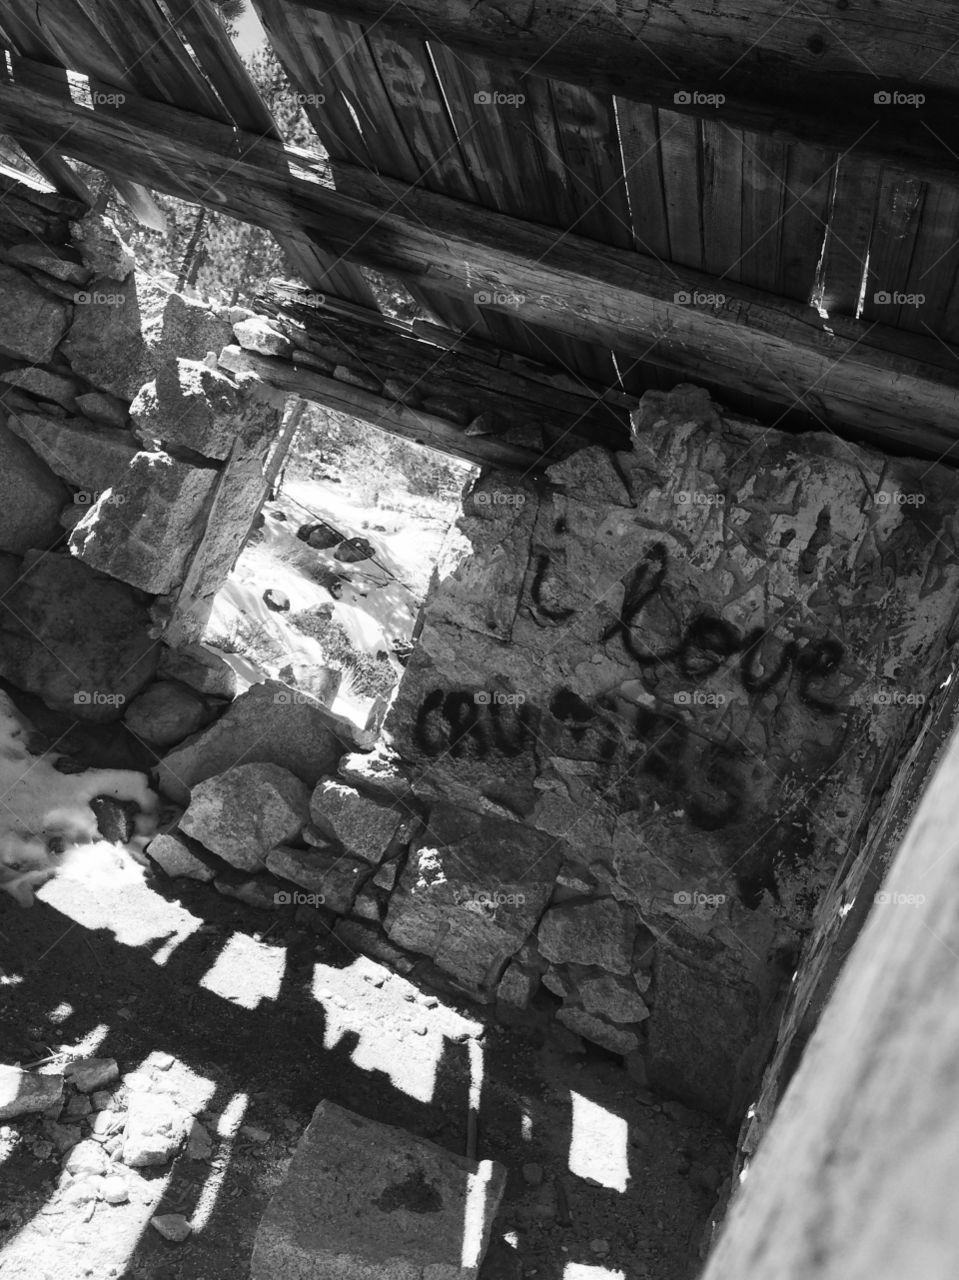 Happiness can be found in the darkest of times. Black and white photo of the inside of a old burned down house in Big Bear with graffiti on the walls